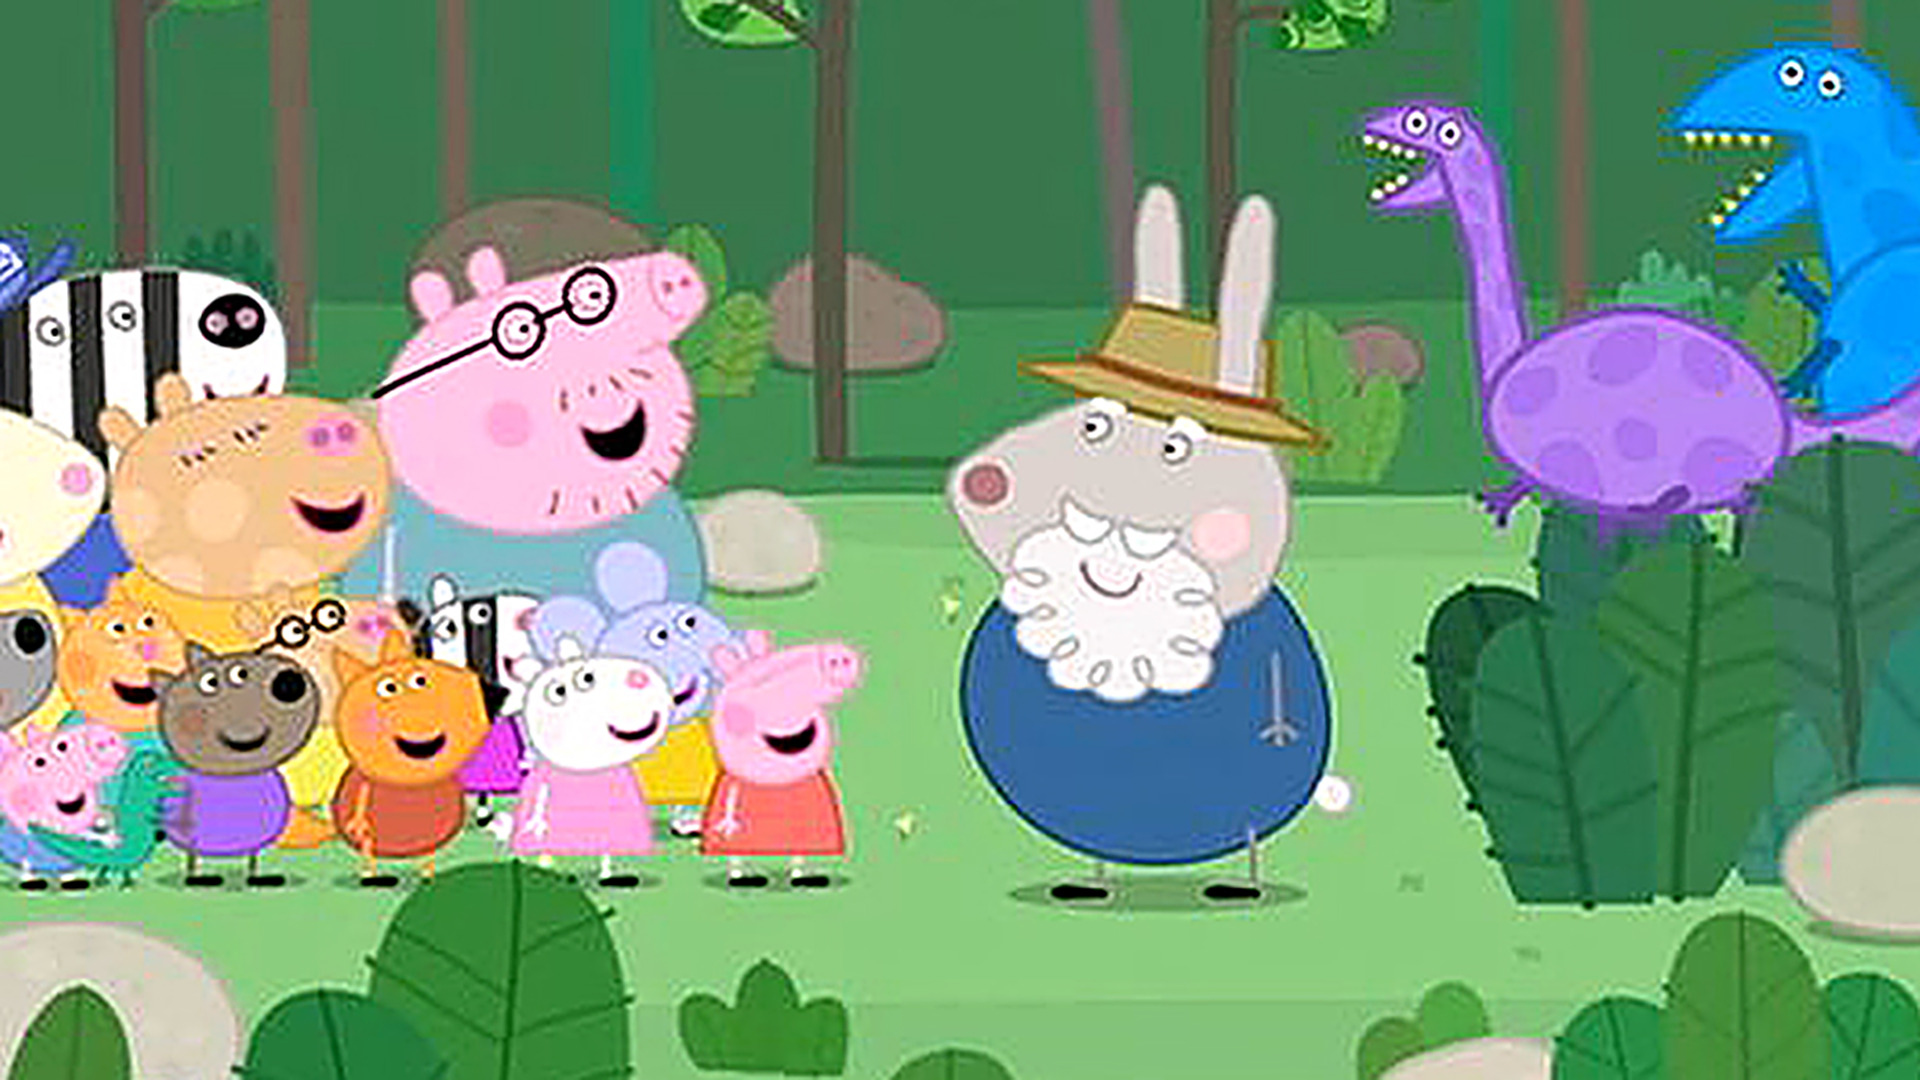 Competition　Dinosaur/Captain　Season　Watch　Grampy's　Pet　Peppa　Kangaroo/The　Dog/Kylie　Daddy　Pig　Episode　4:　New　Park/George's　Dinosaur　Full　Paramount　show　on　Plus